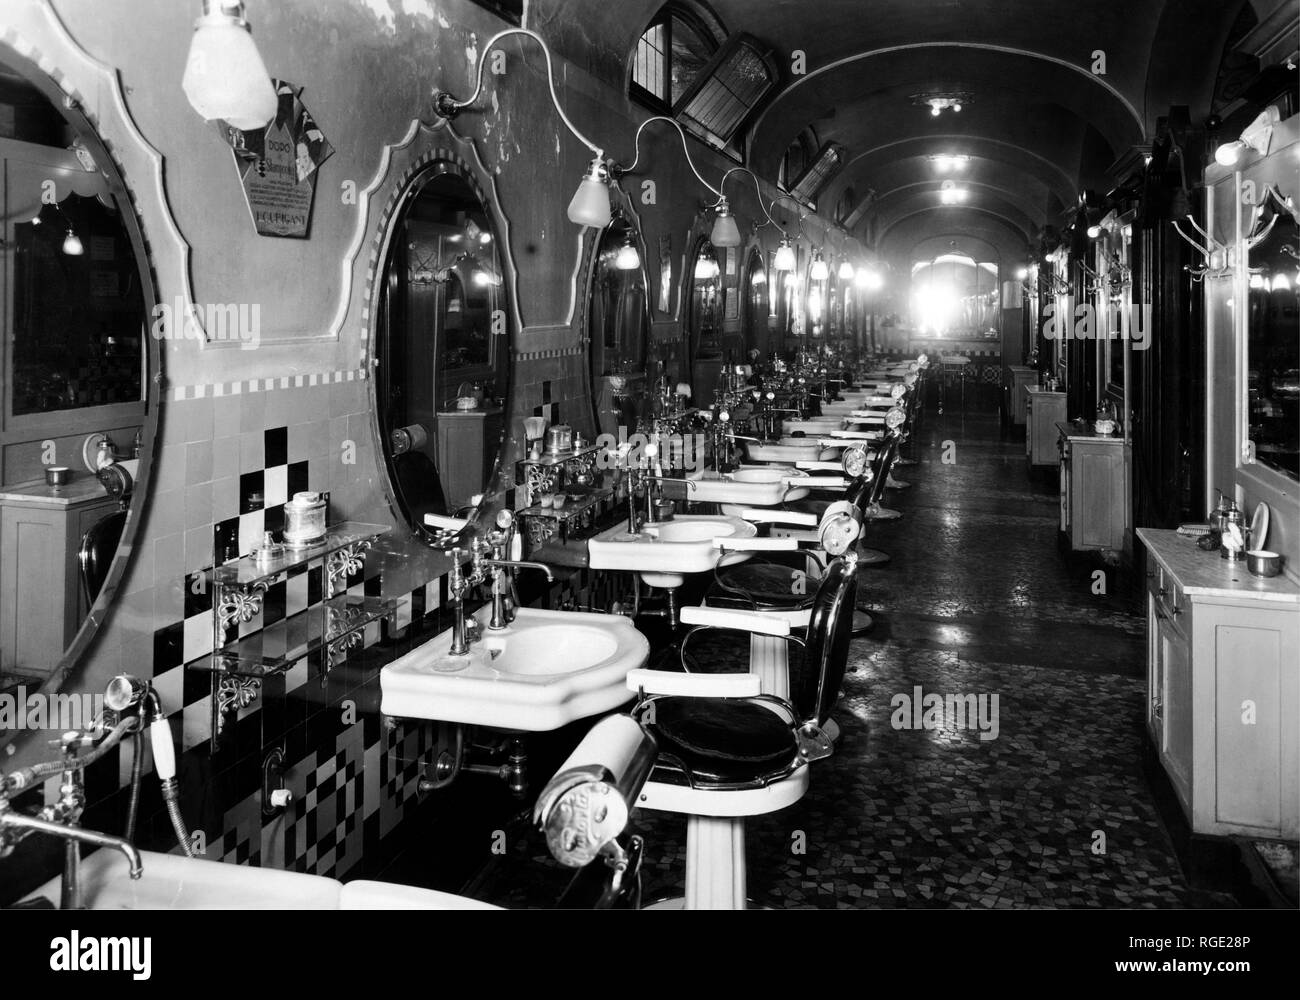 Italien, Mailand, Friseure' Zimmer des Tages Hotel cobianchi in Piazza Duomo, 20 s-30 s Stockfoto